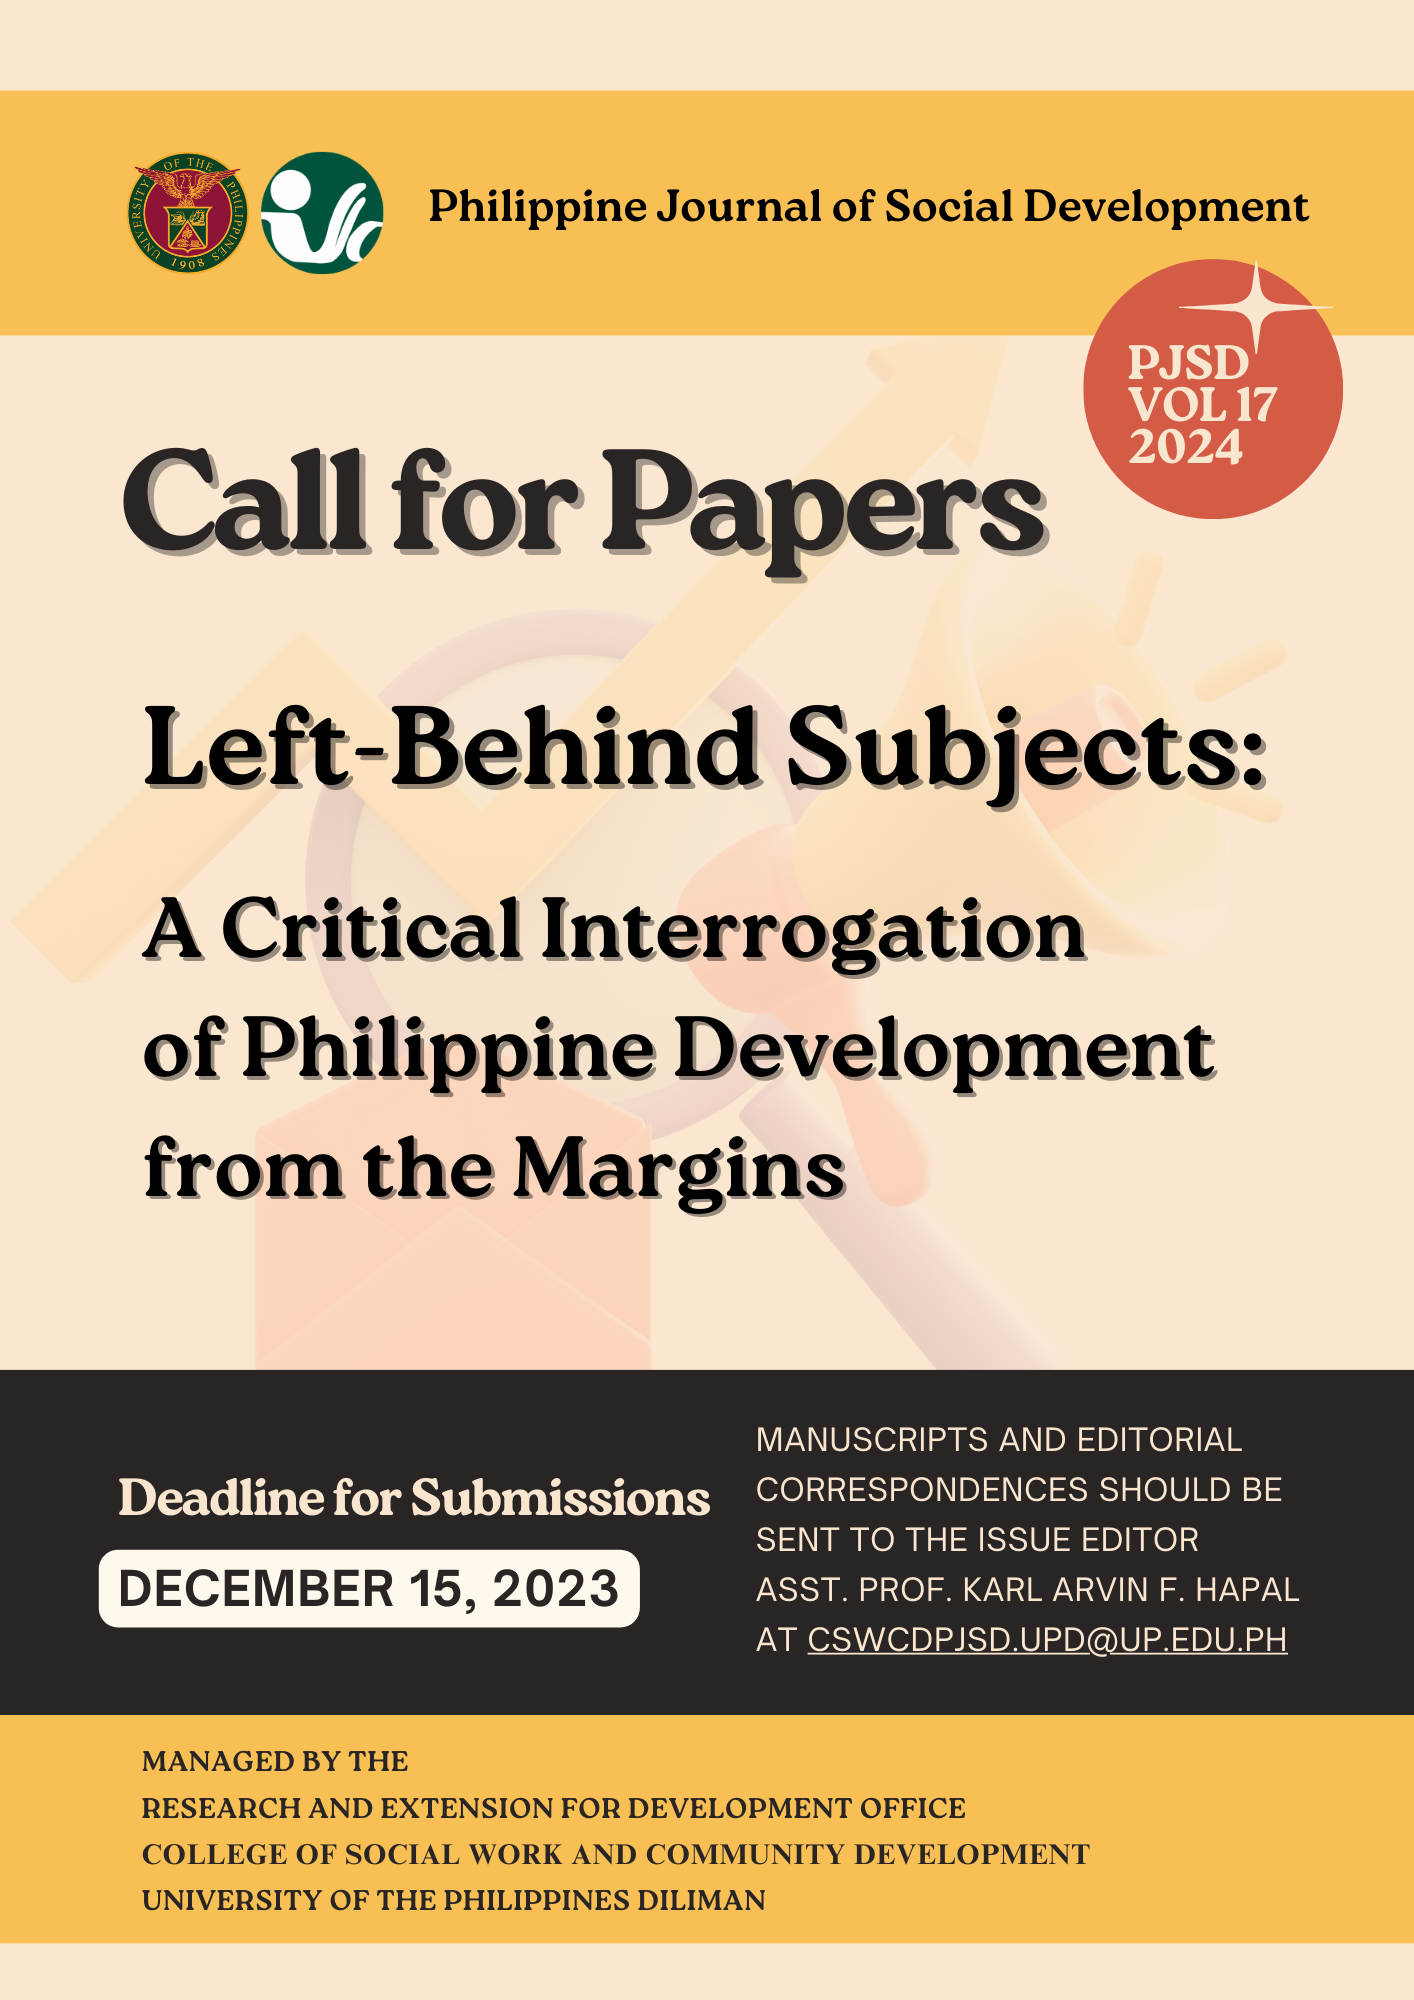 Call for Papers: Philippine Journal of Social Development 2024 Vol 17 Left-Behind Subjects: A Critical Interrogation of Philippine Development from the Margins